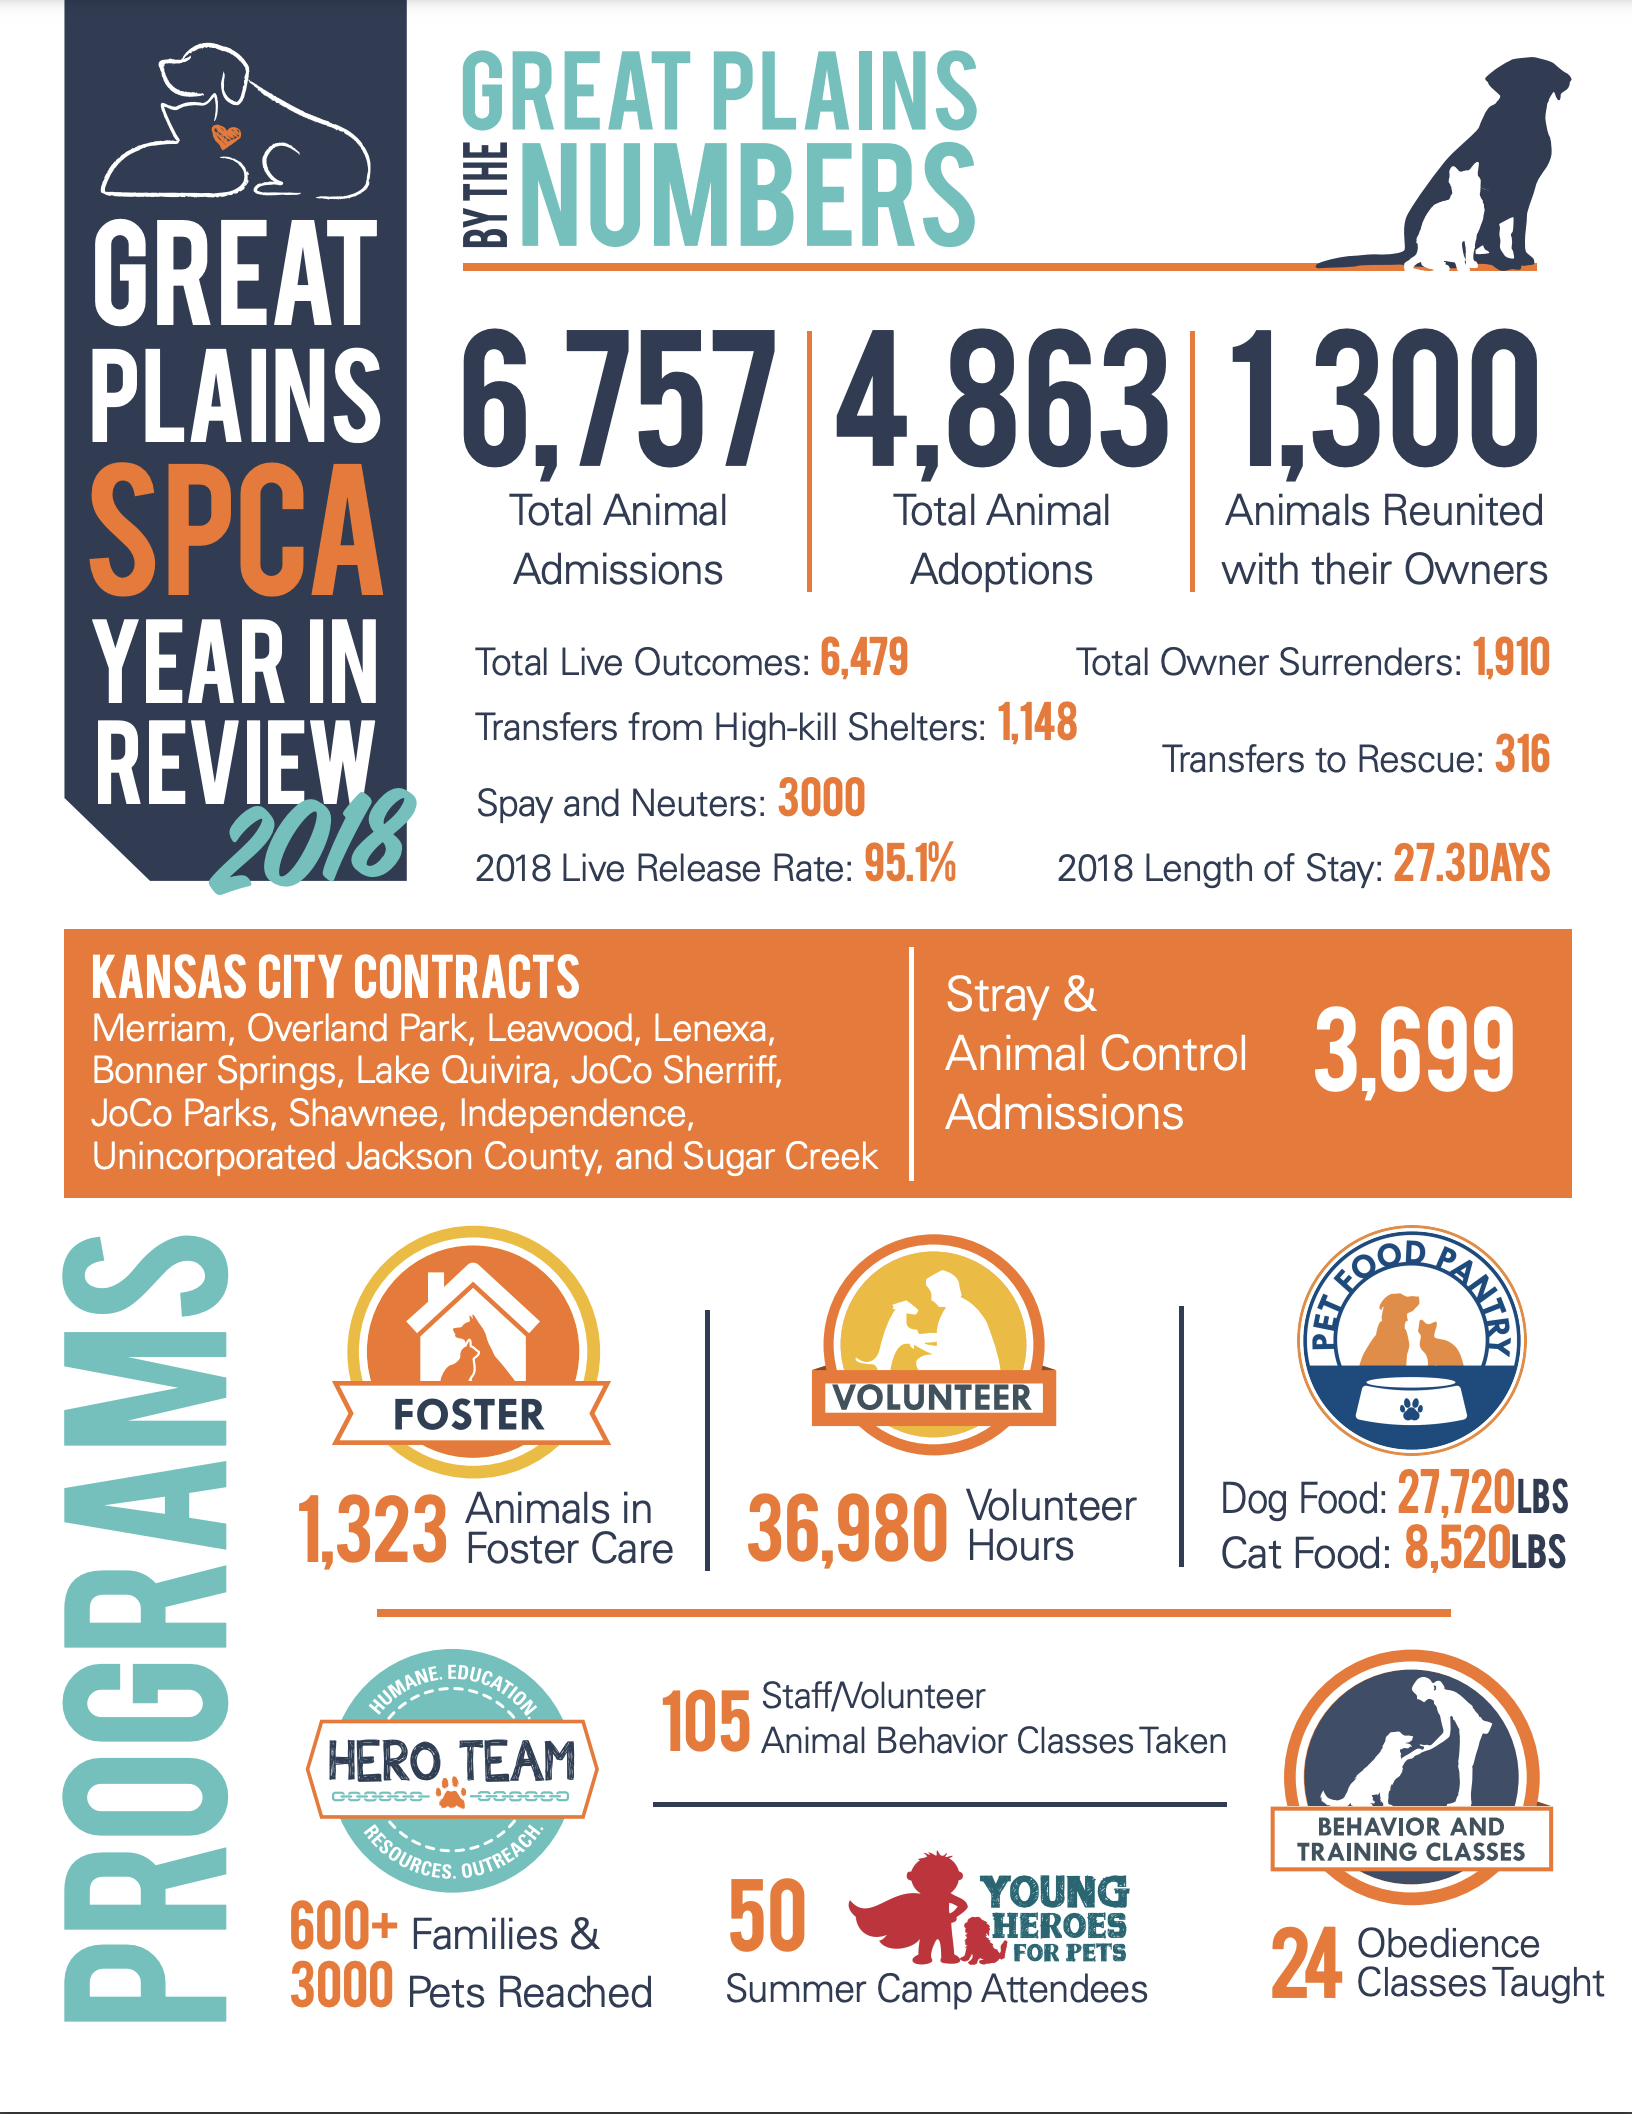 Great Plains SPCA 2018 Year In Review